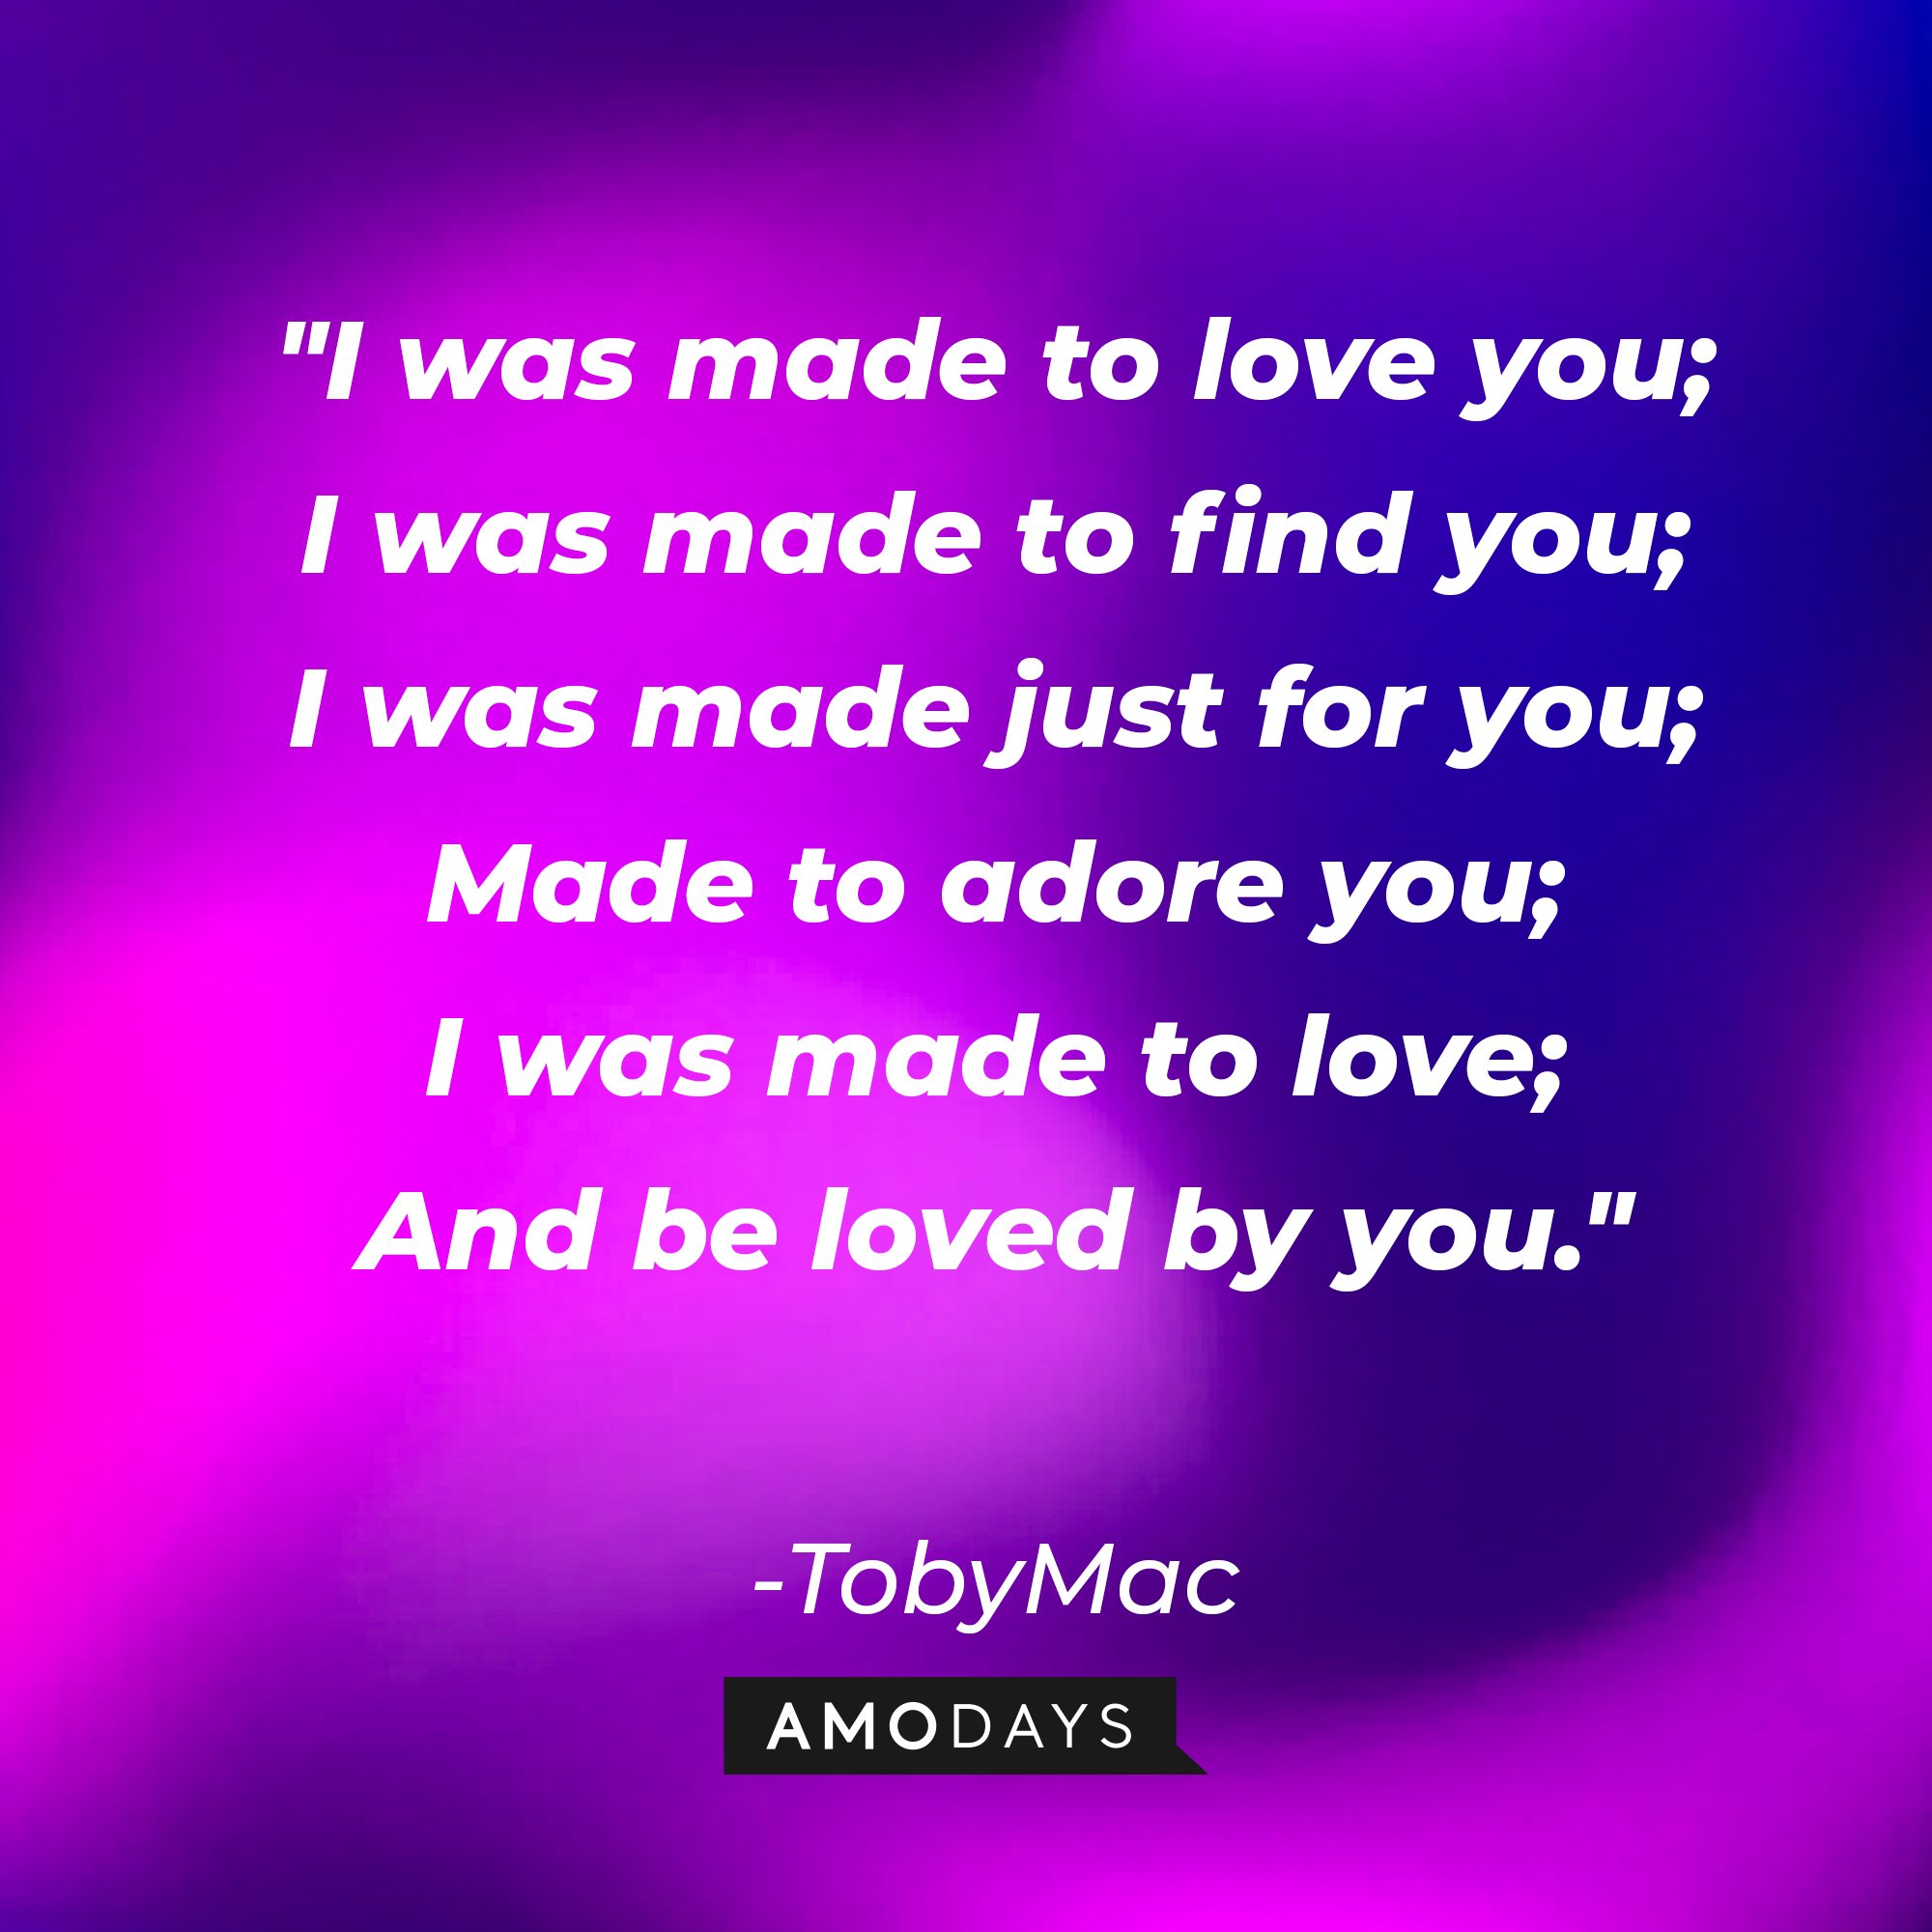 TobyMac's quote: "I was made to love you; I was made to find you; I was made just for you; Made to adore you; I was made to love; And be loved by you." | Image: AmoDays